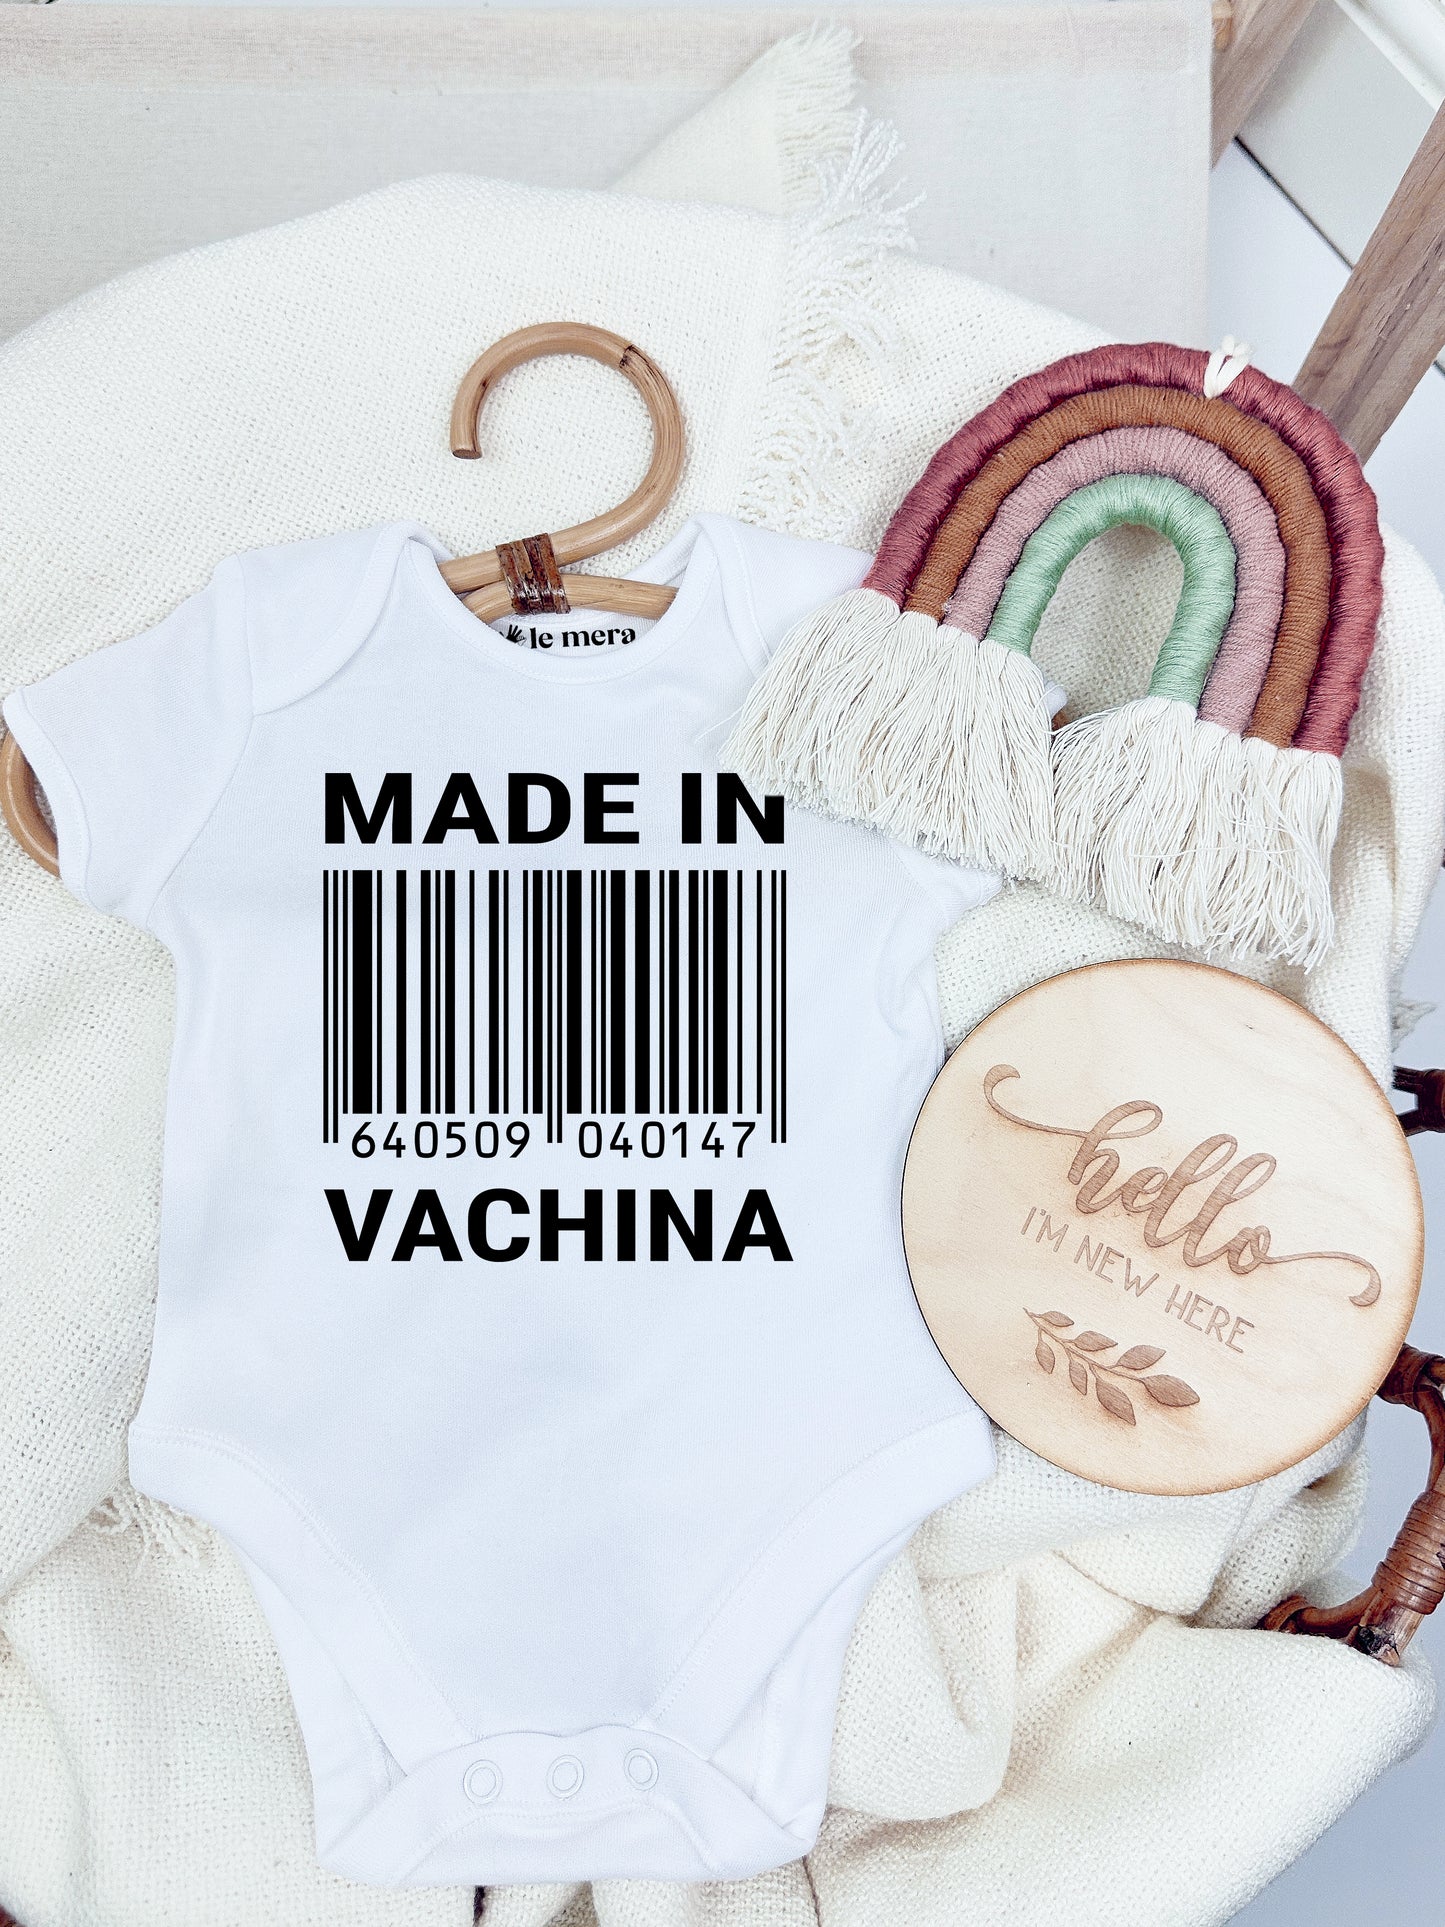 Made In Vachina Baby Vest, Baby Grow